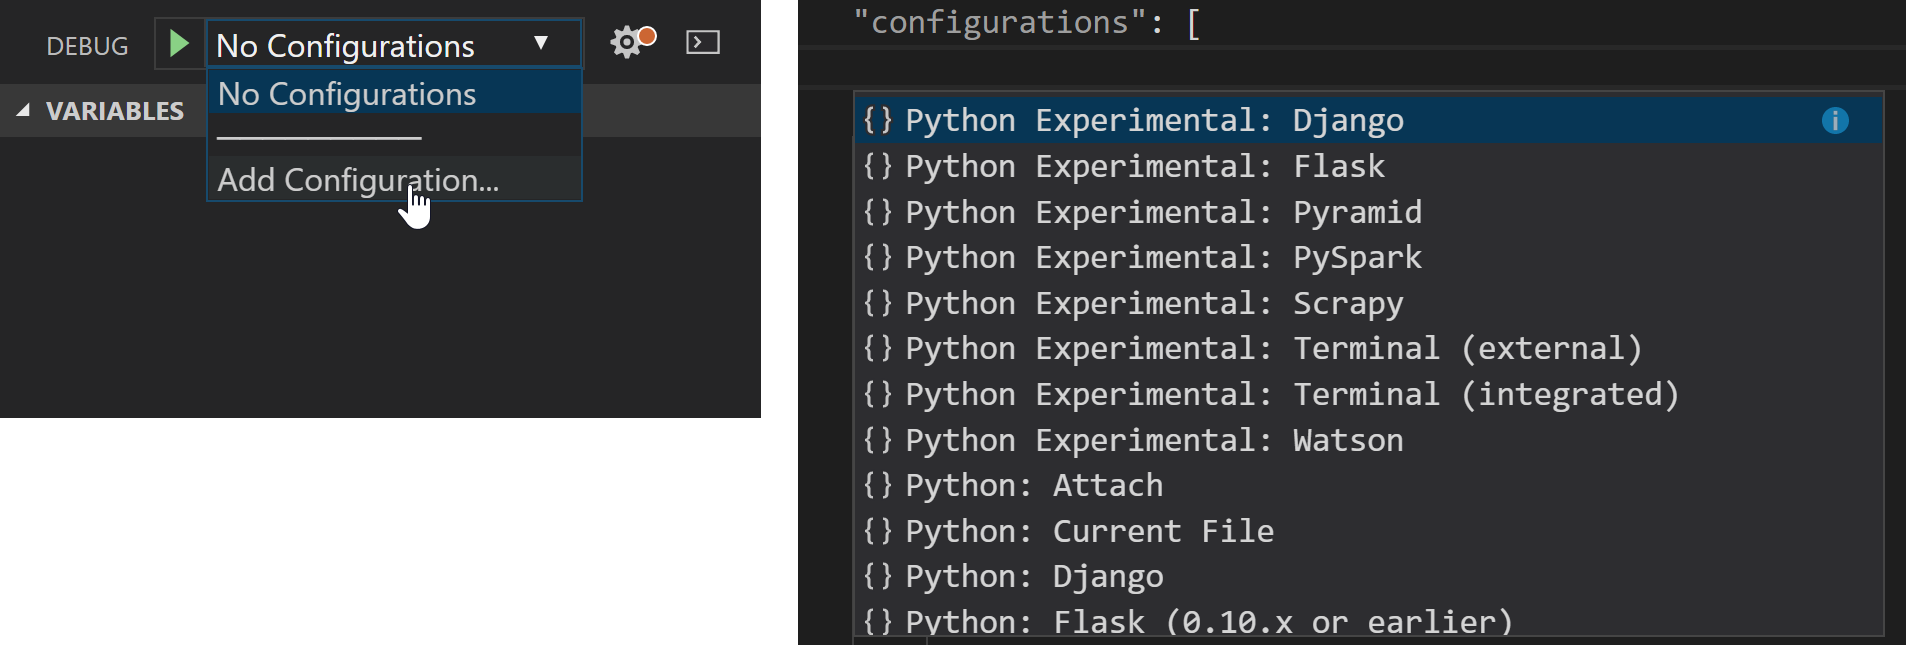 Announcing the PowerShell Preview Extension in VSCode 1_ExperimentalDebugConfigs.png